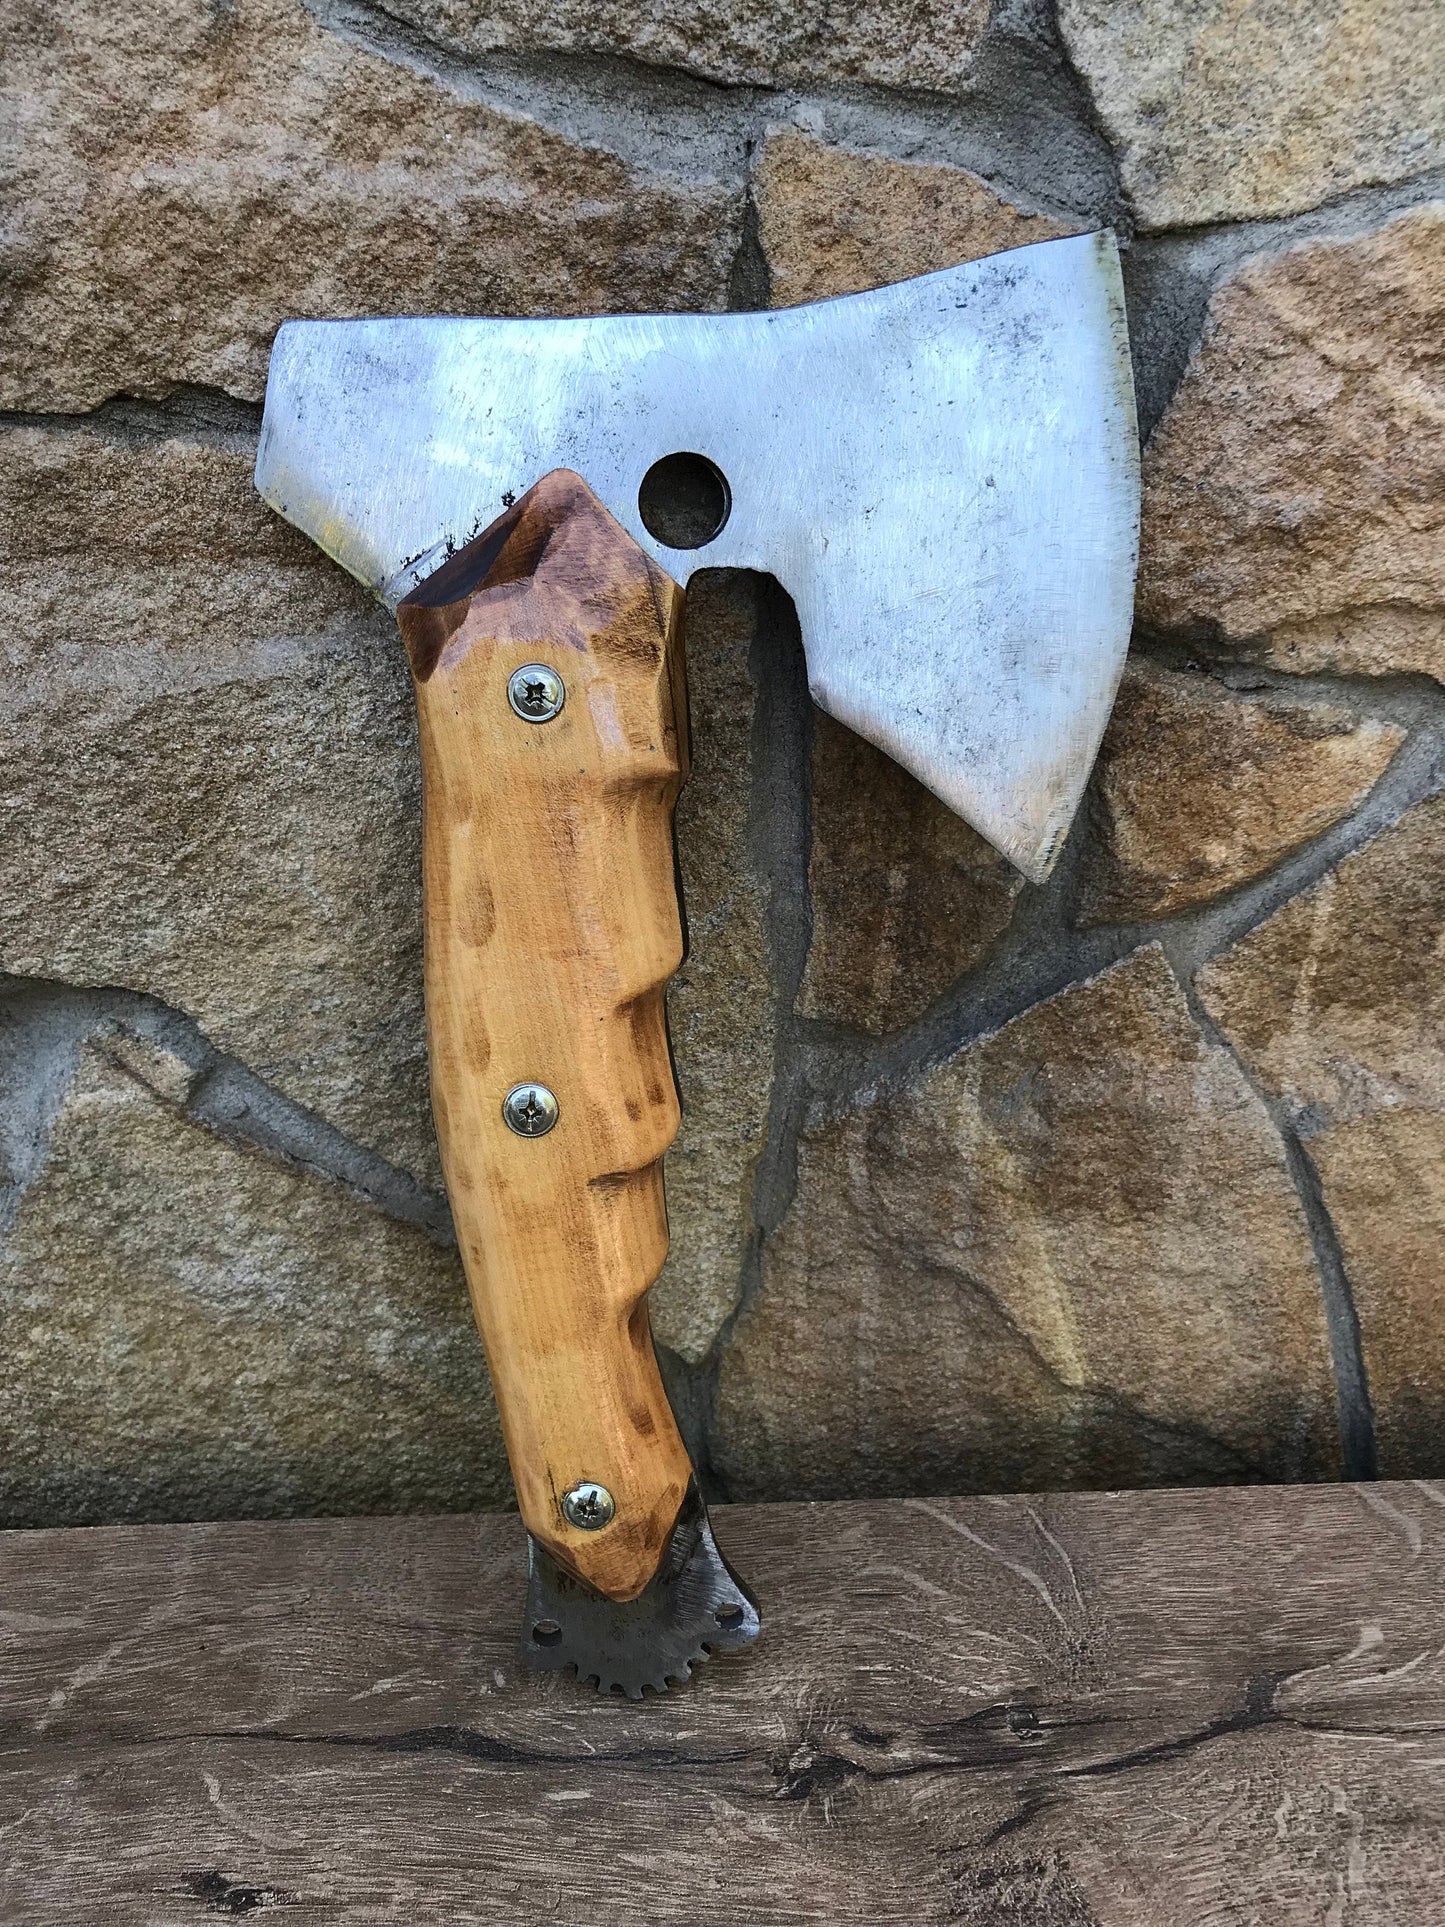 Throwing axe, viking axe, tactical axe, medieval axe, axe, mens gifts, iron gift for him, tomahawk, hiking, hunting,gifts for men,manly gift